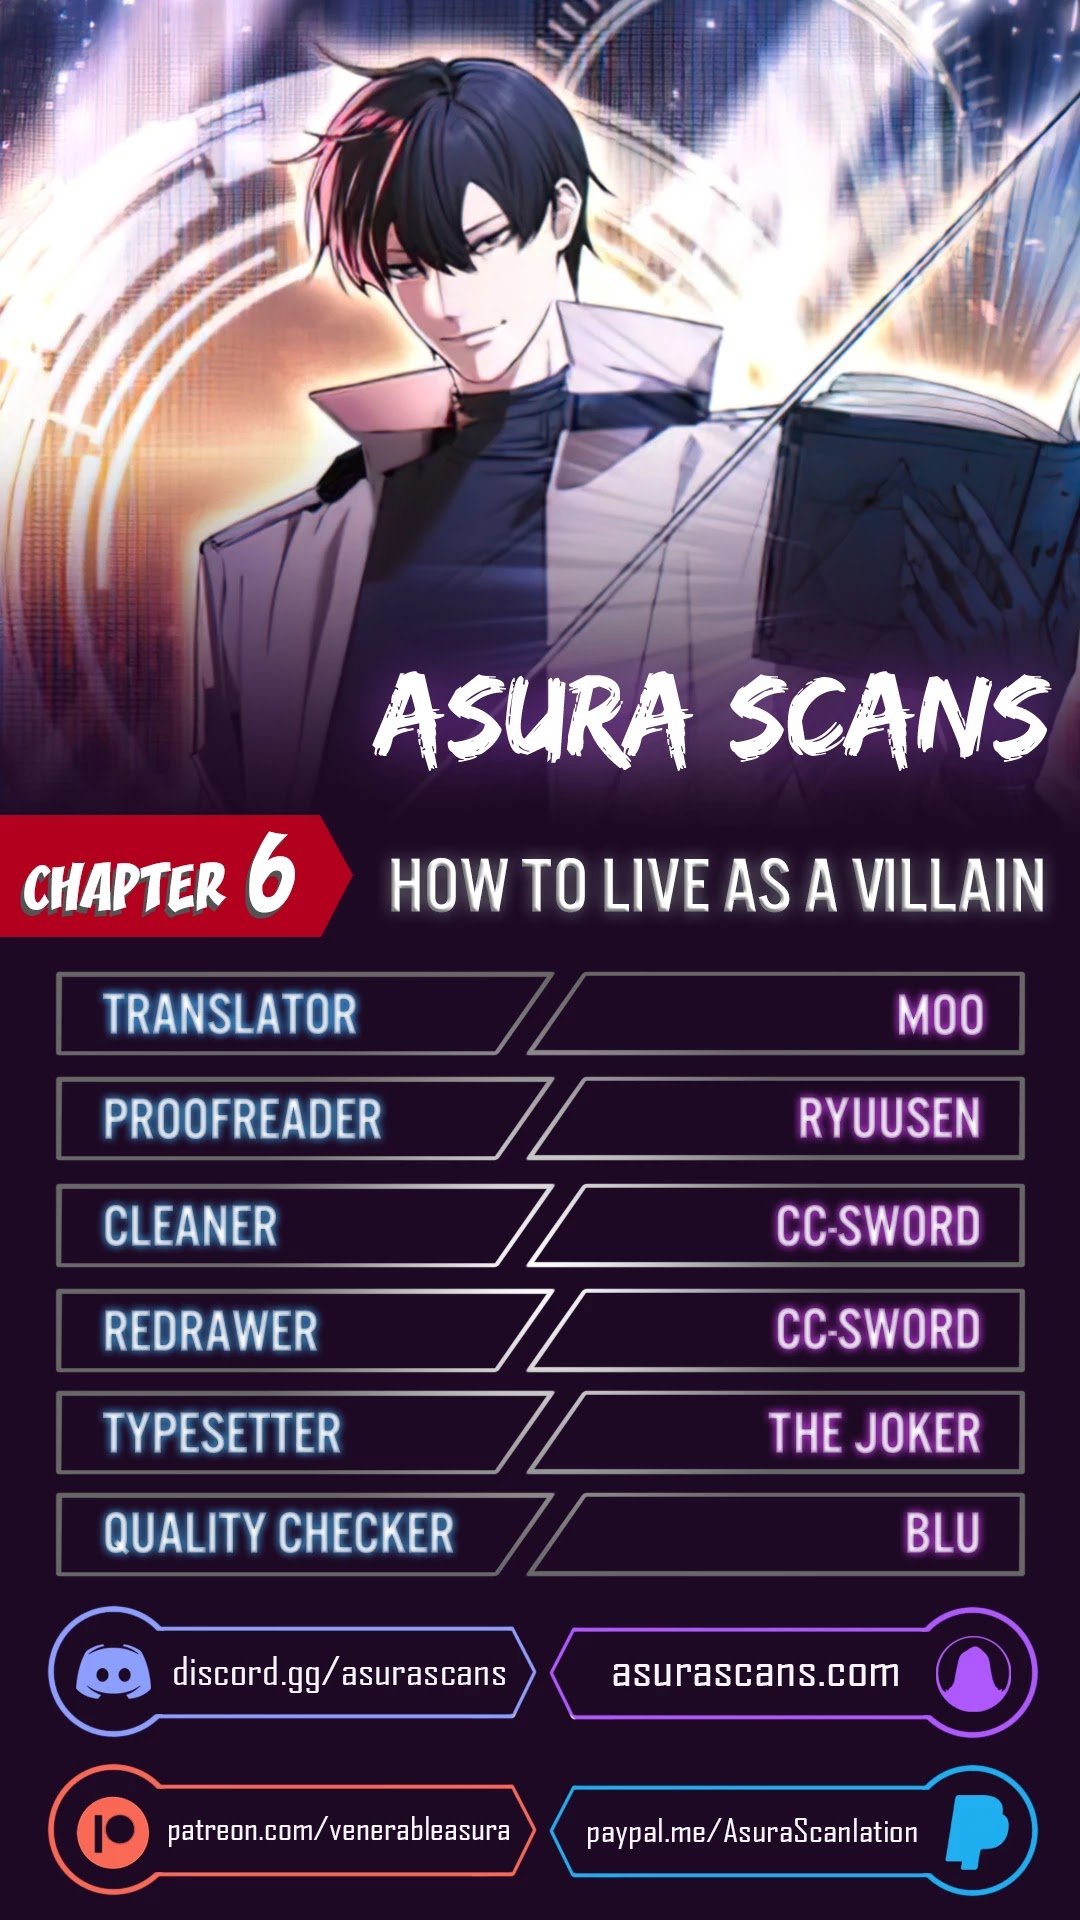 How to Live as a Villain chapter 6